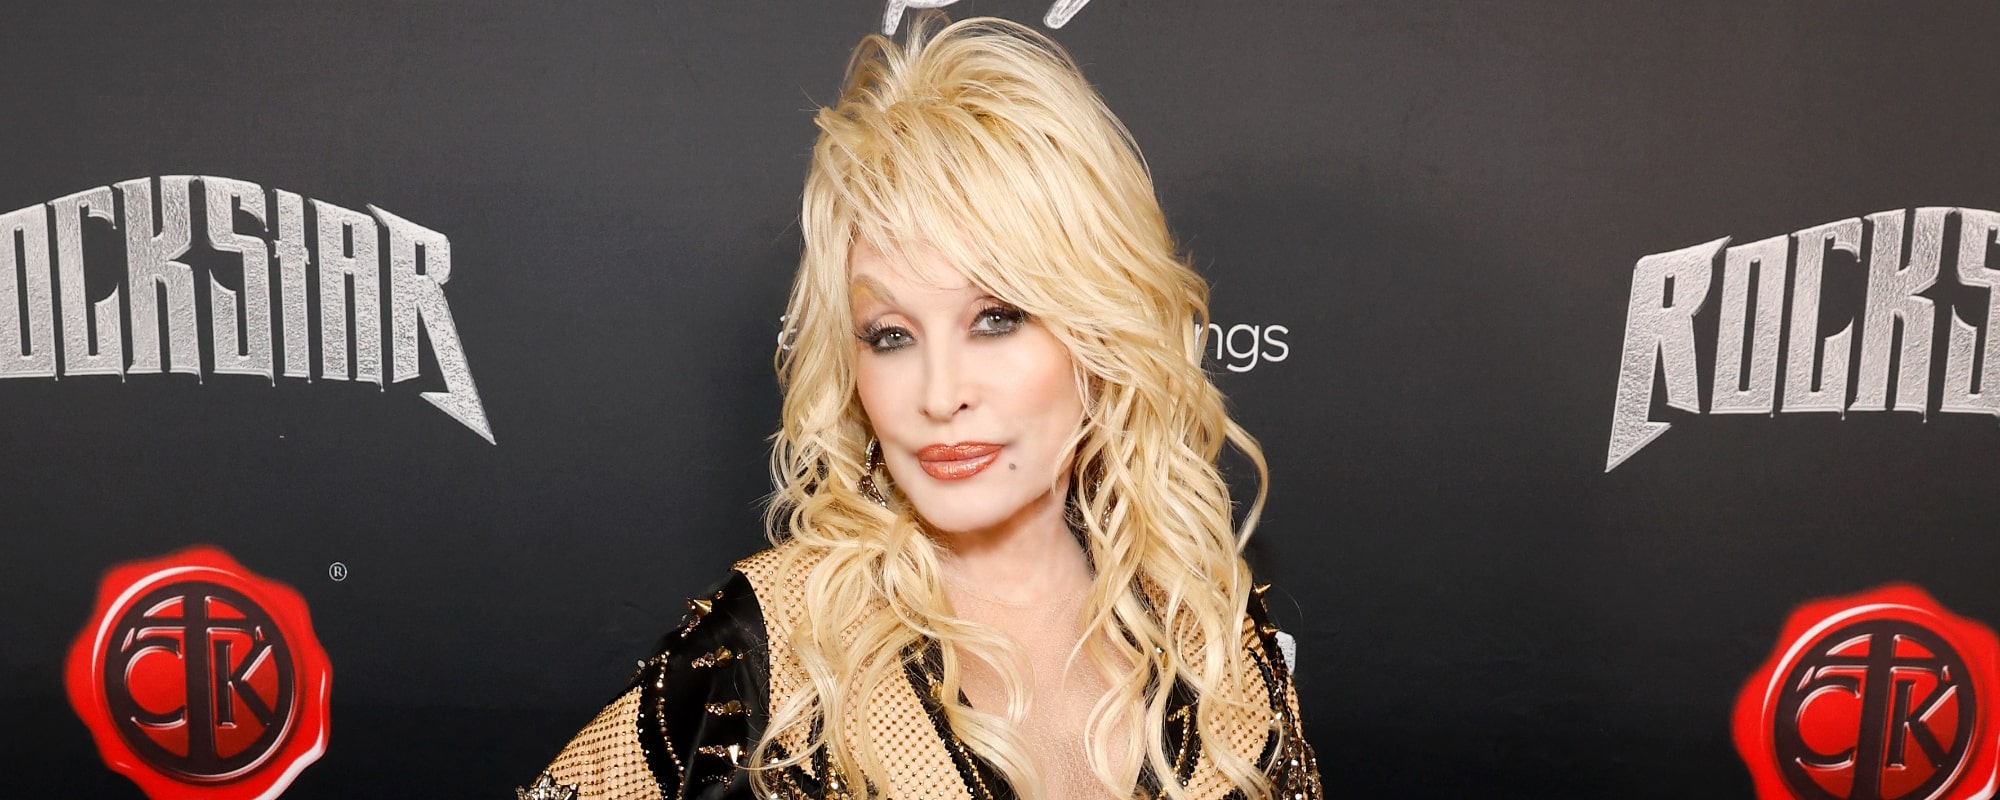 Dolly Parton Announces New Cookbook “Good Lookin’ Cookin” Written with Her Sister Rachel